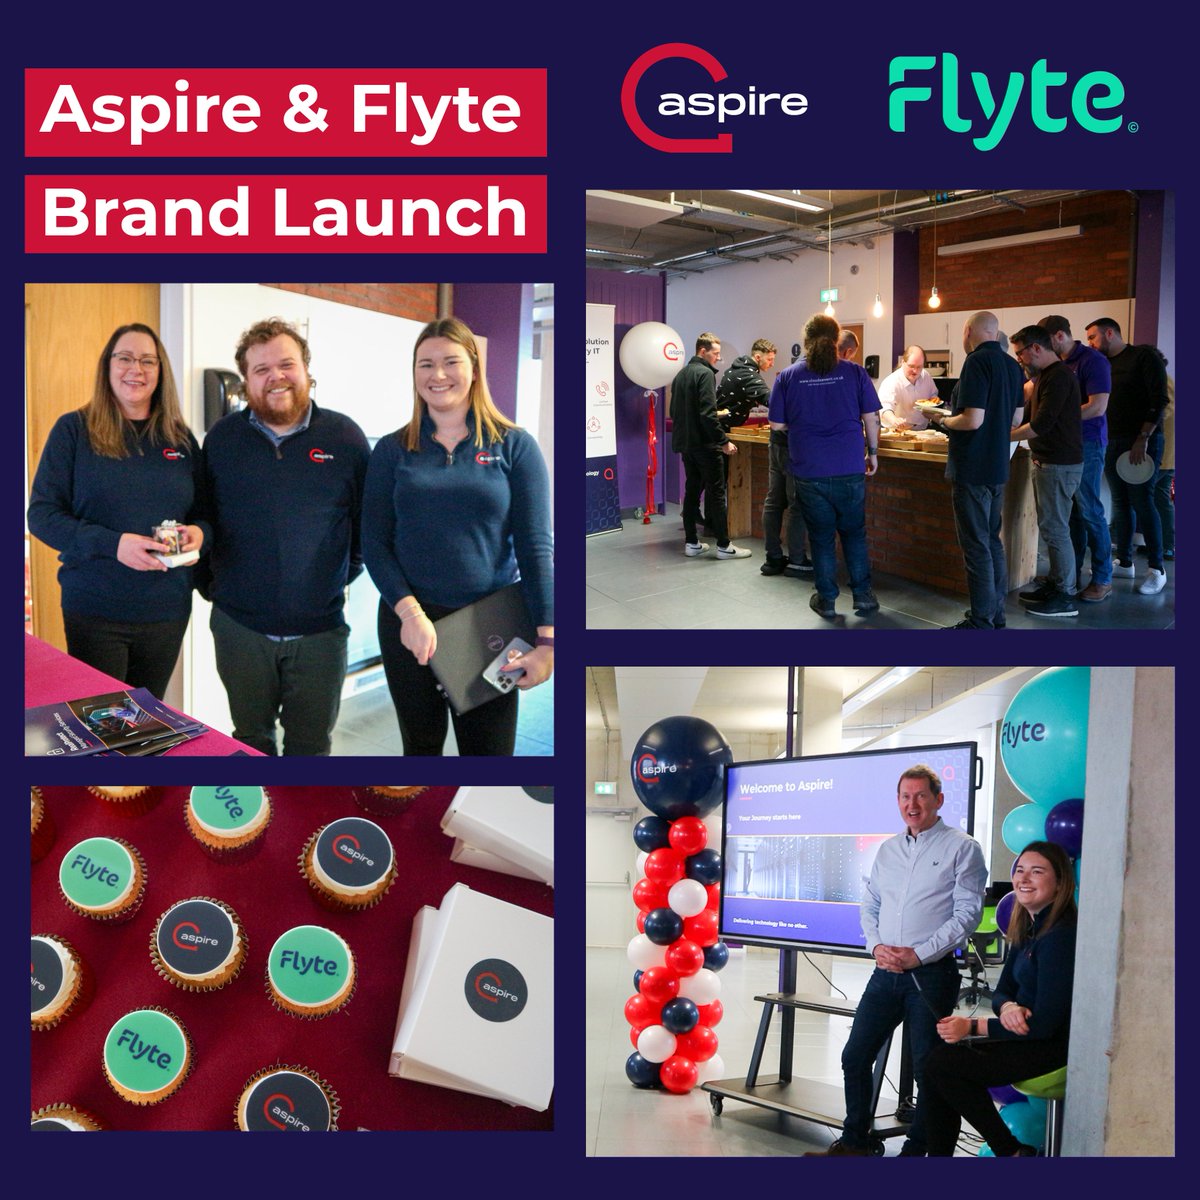 Exciting news! We're thrilled to announce the launch of Aspire and @flytecloud brands in our Glasgow office! @cloudcoverIT is now Aspire and its software division is rebranded as 'Flyte'. We're joining forces for greater customer value. #AspireForMore